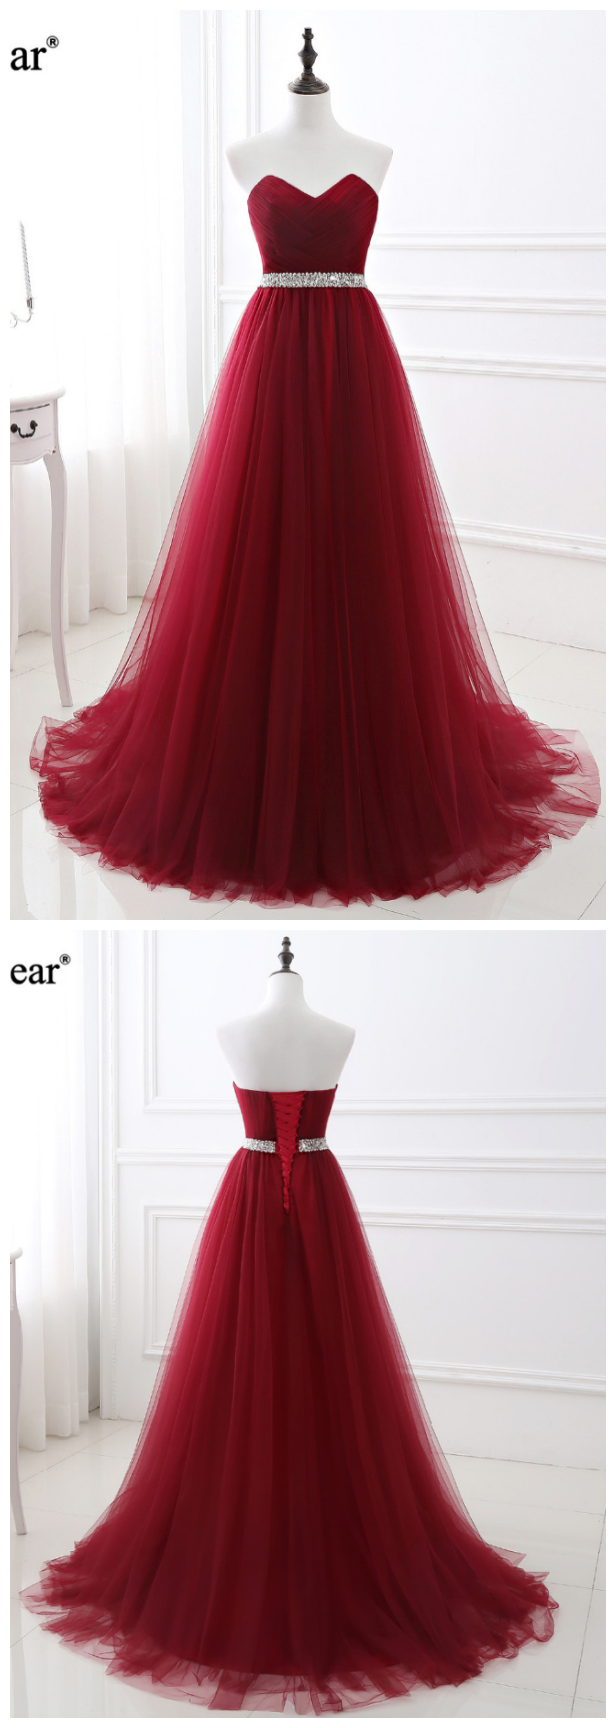 Tulle Formal Evening Gown ,sweetheart Lace Up Back Burgundy Evening Dress